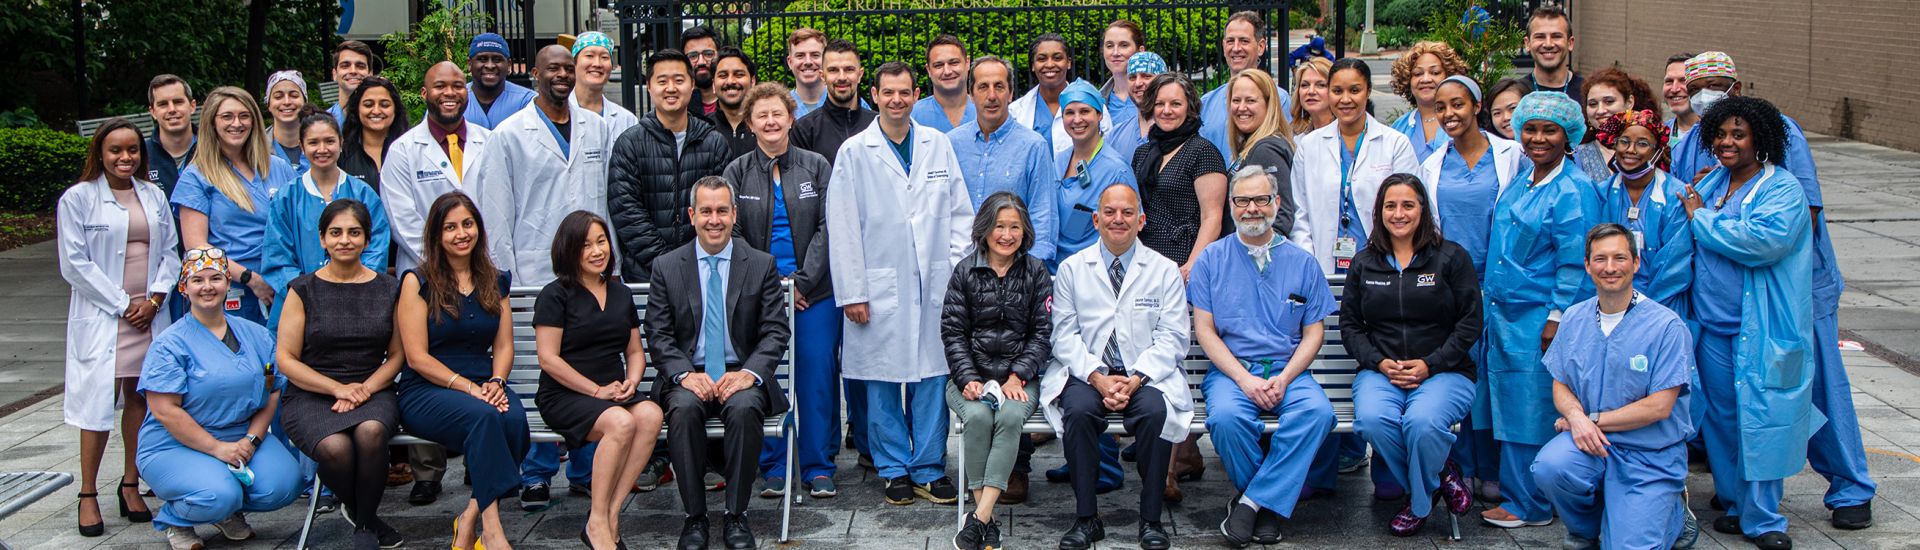 Anesthesiology group photo